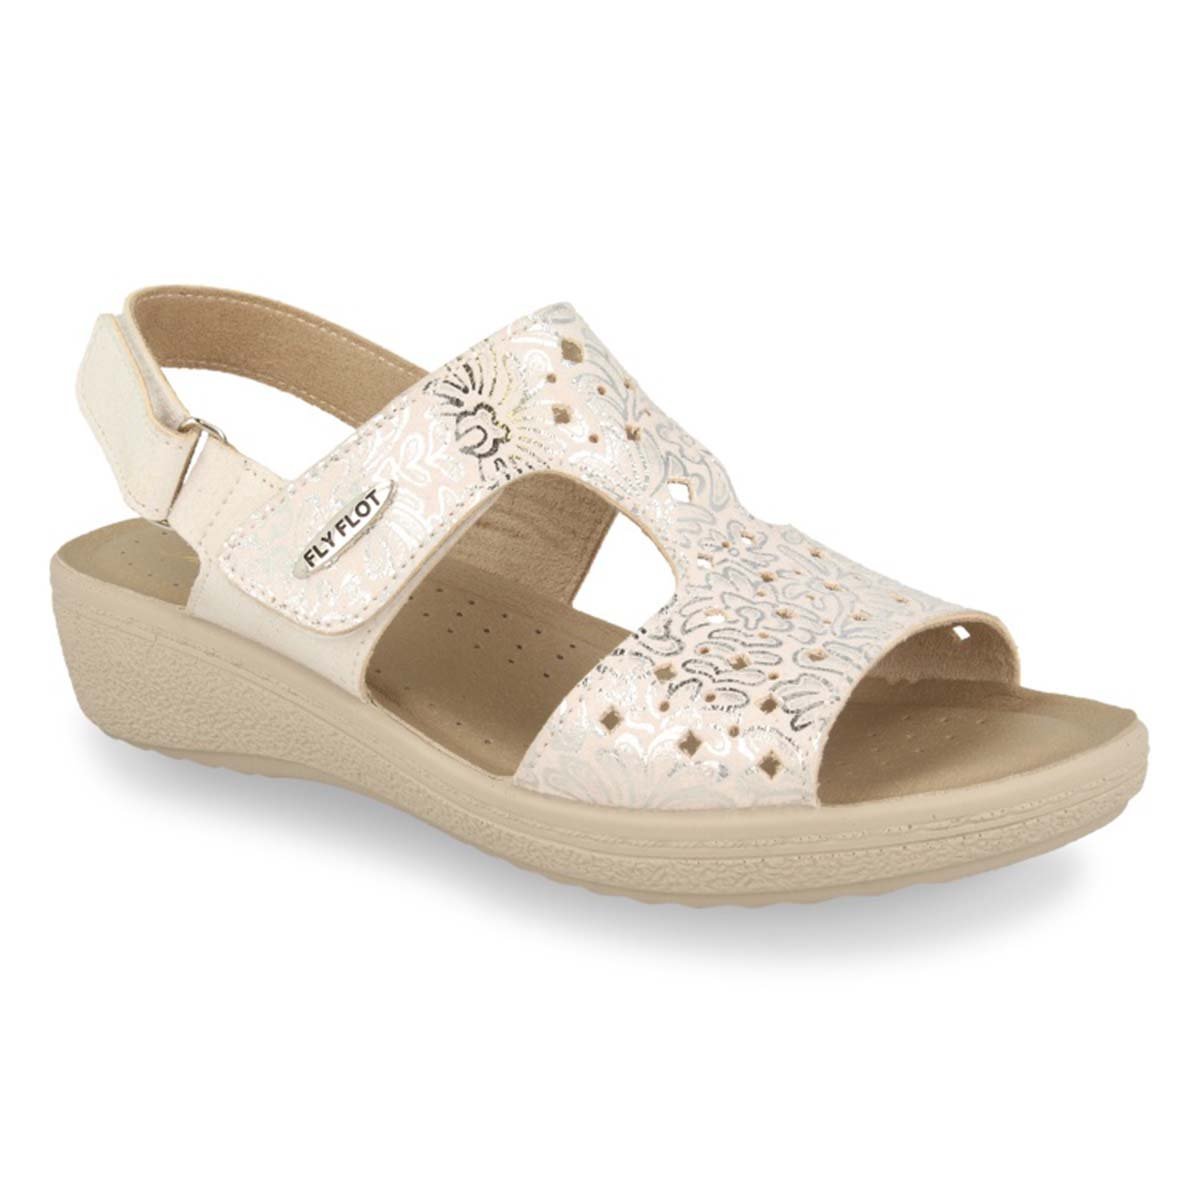 See the Velcro With Back Strap Women Sandals With Microfiber Upper And Faux Leather Insole in the colour BEIGE, available in various sizes